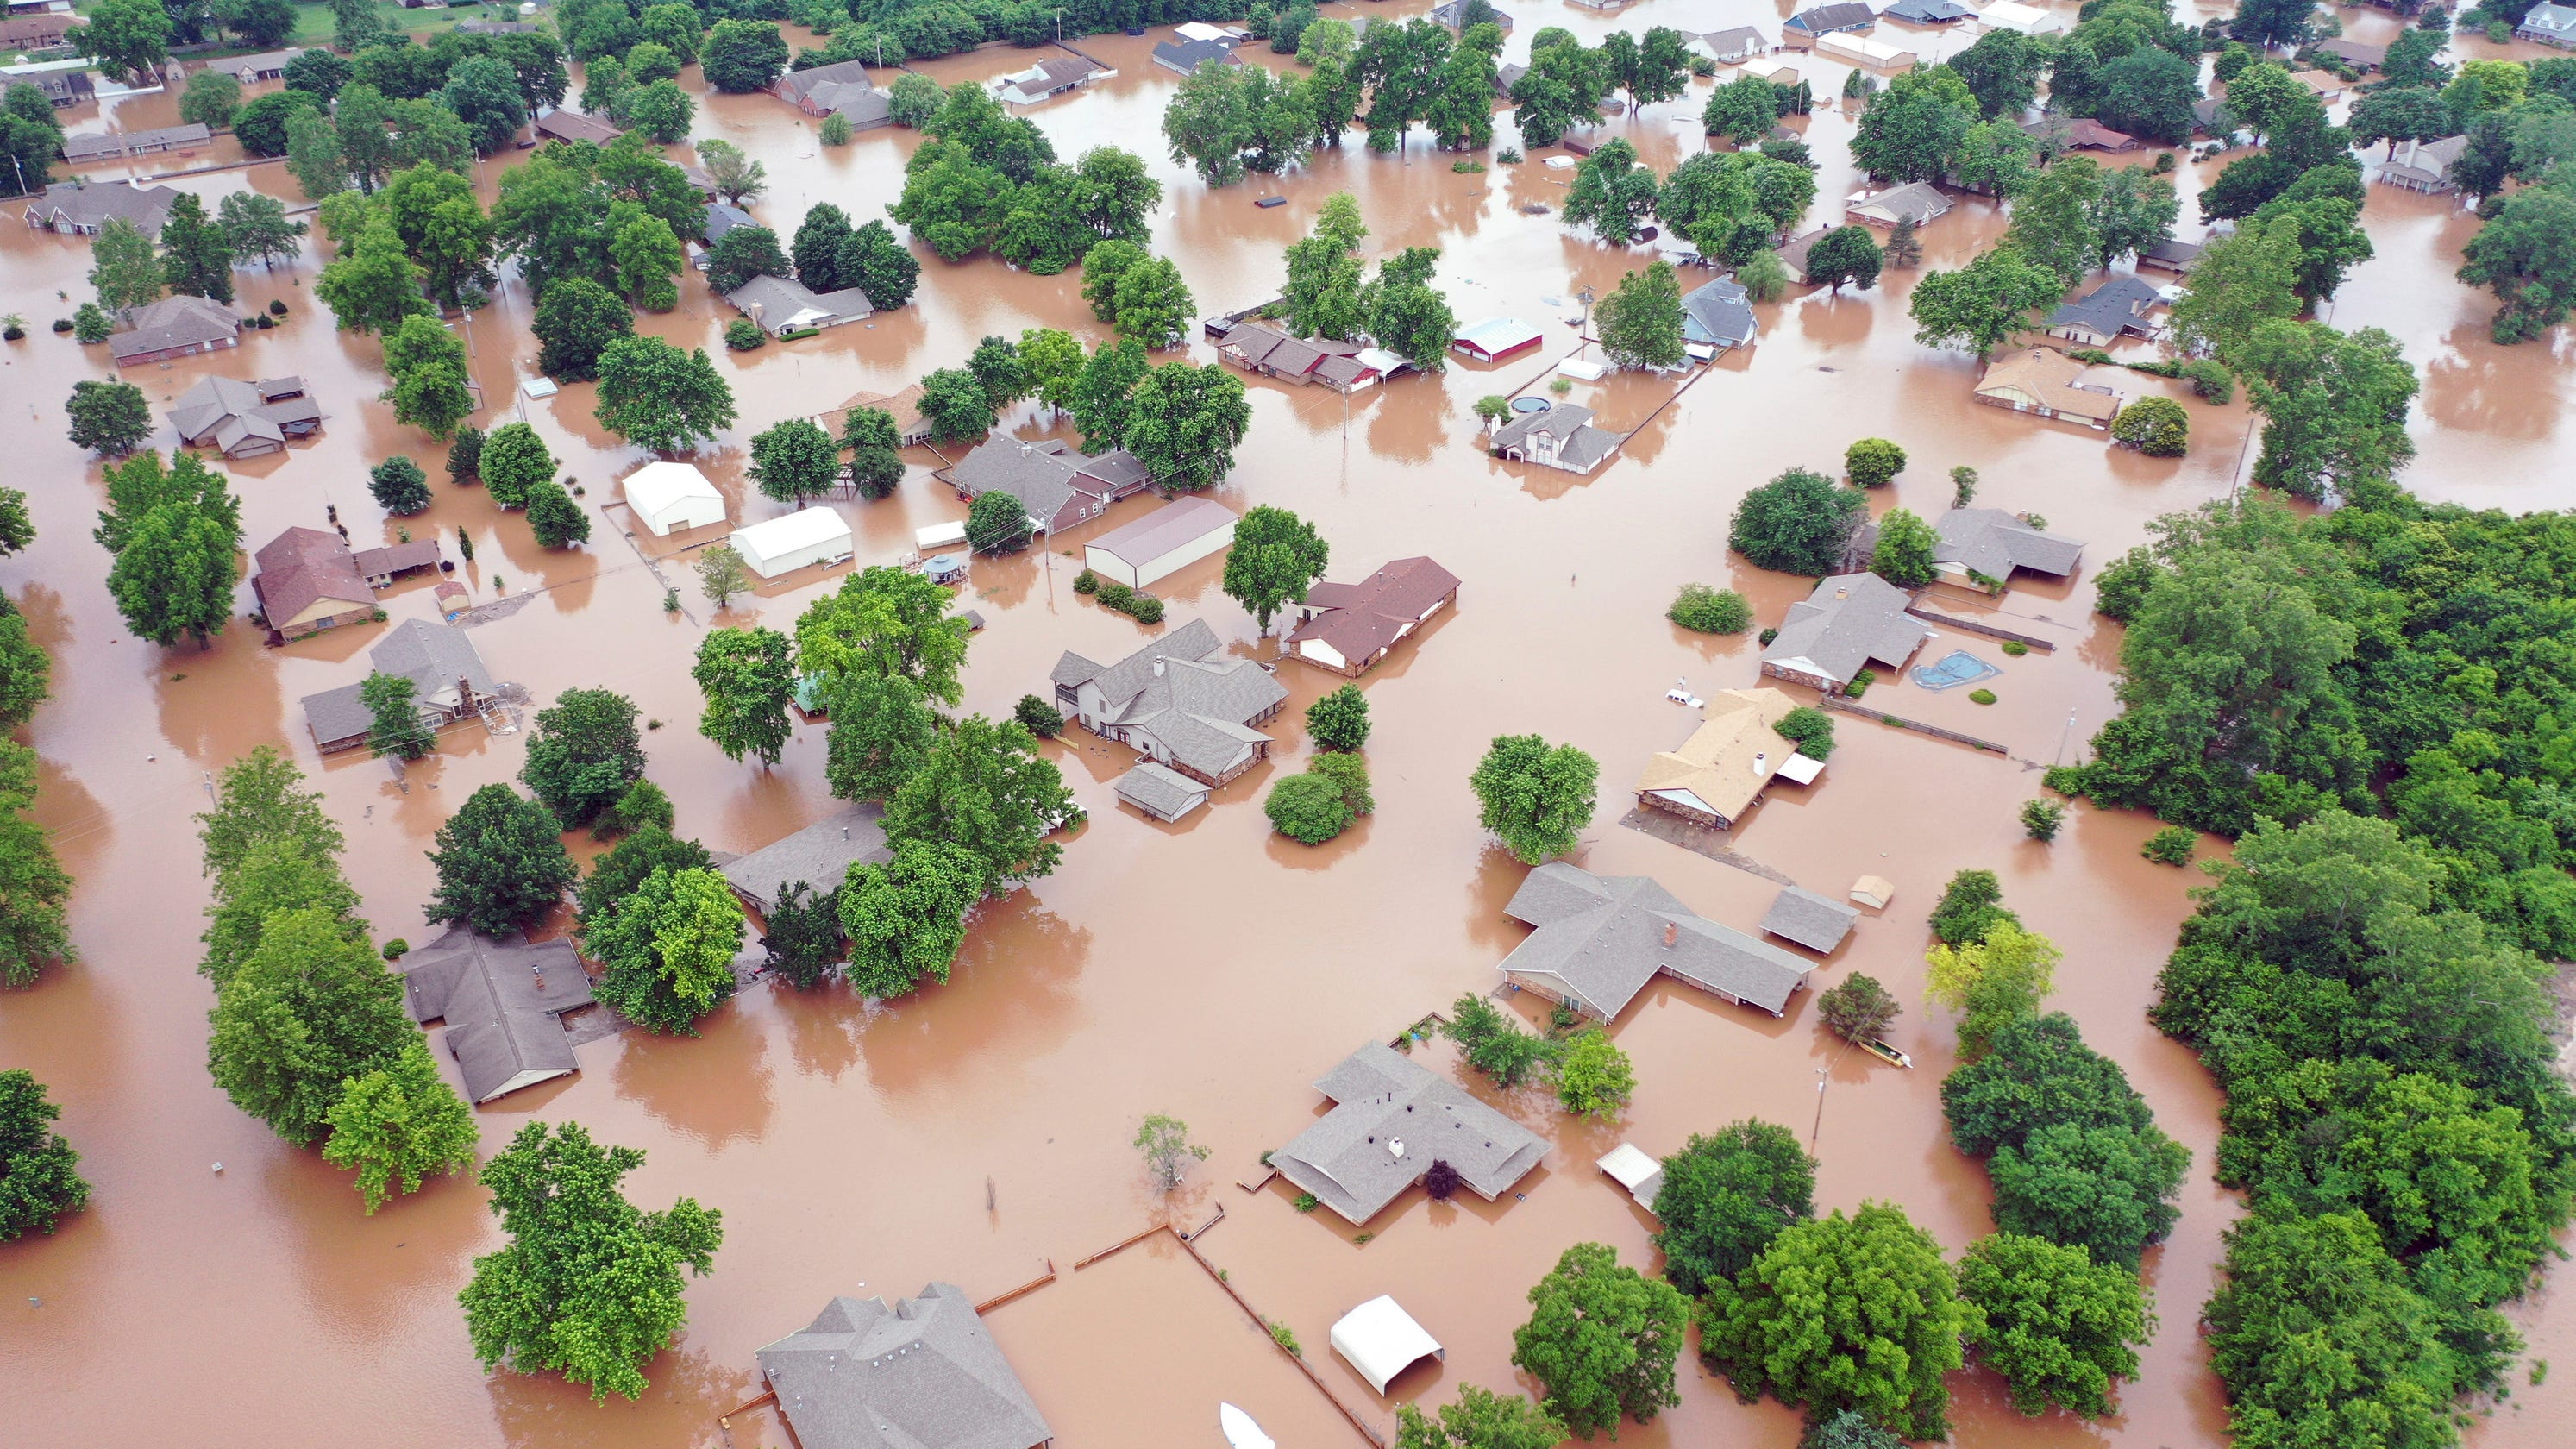 Historic Arkansas River Flood of 2019 the Focus of State Rep. Lonnie Sims' Study Request